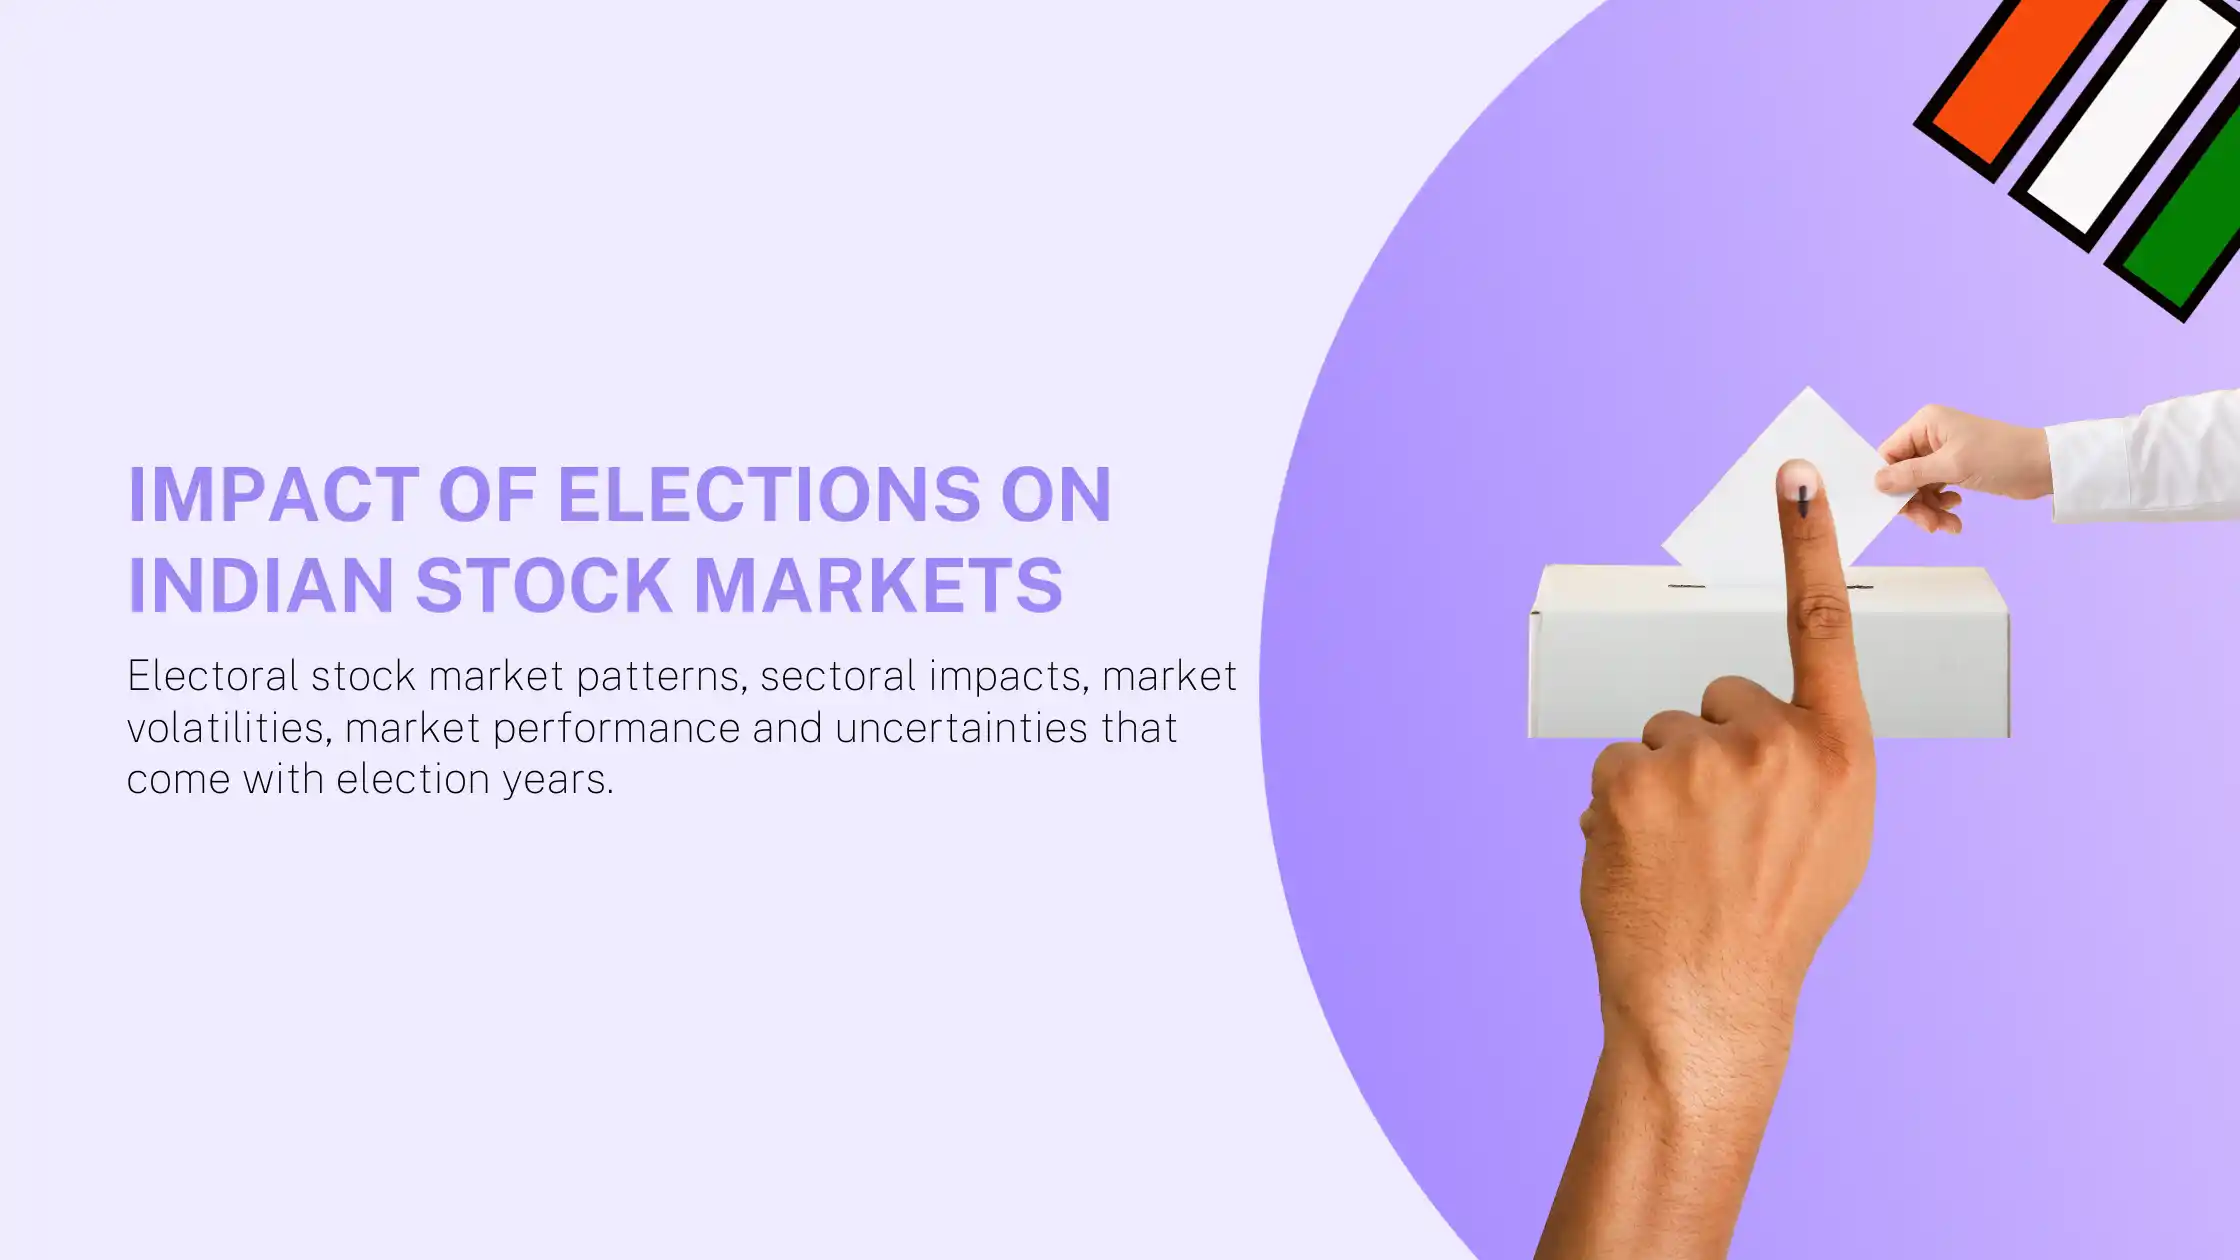 Impact Of Elections on Indian Stock Markets